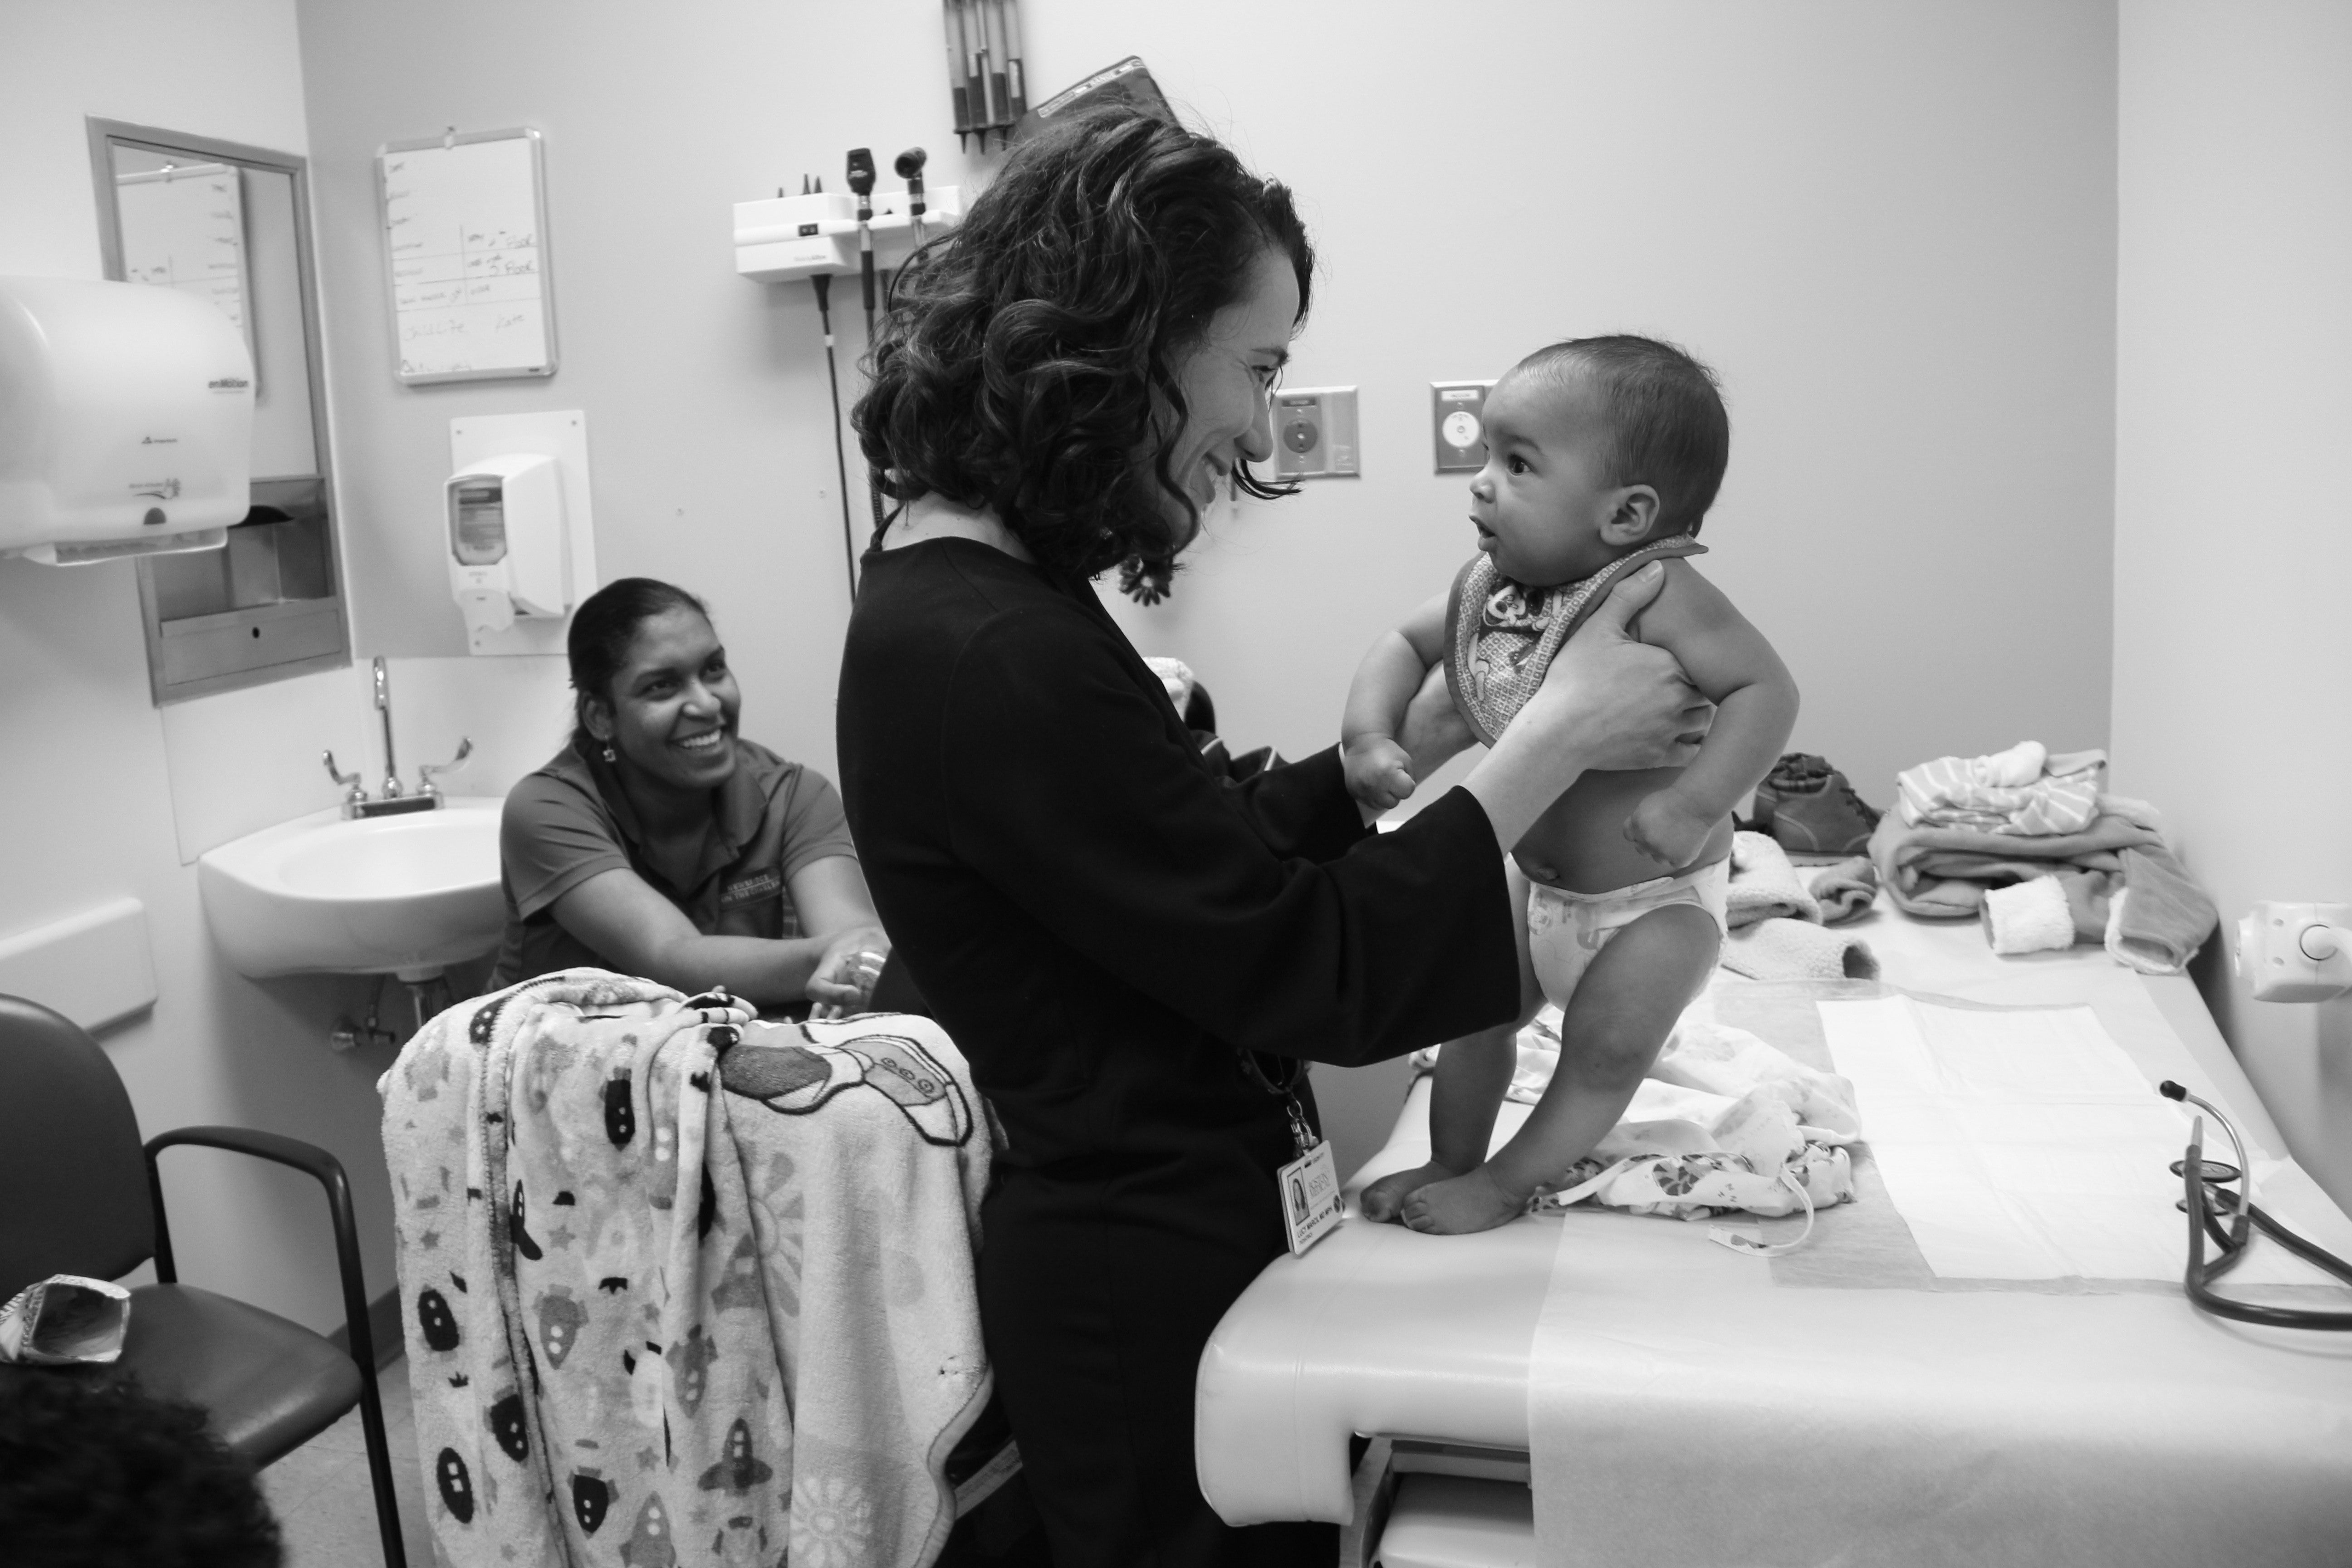 Lucy Marcil holding a young baby in a BMC clinic while mom watches with a smile from the background